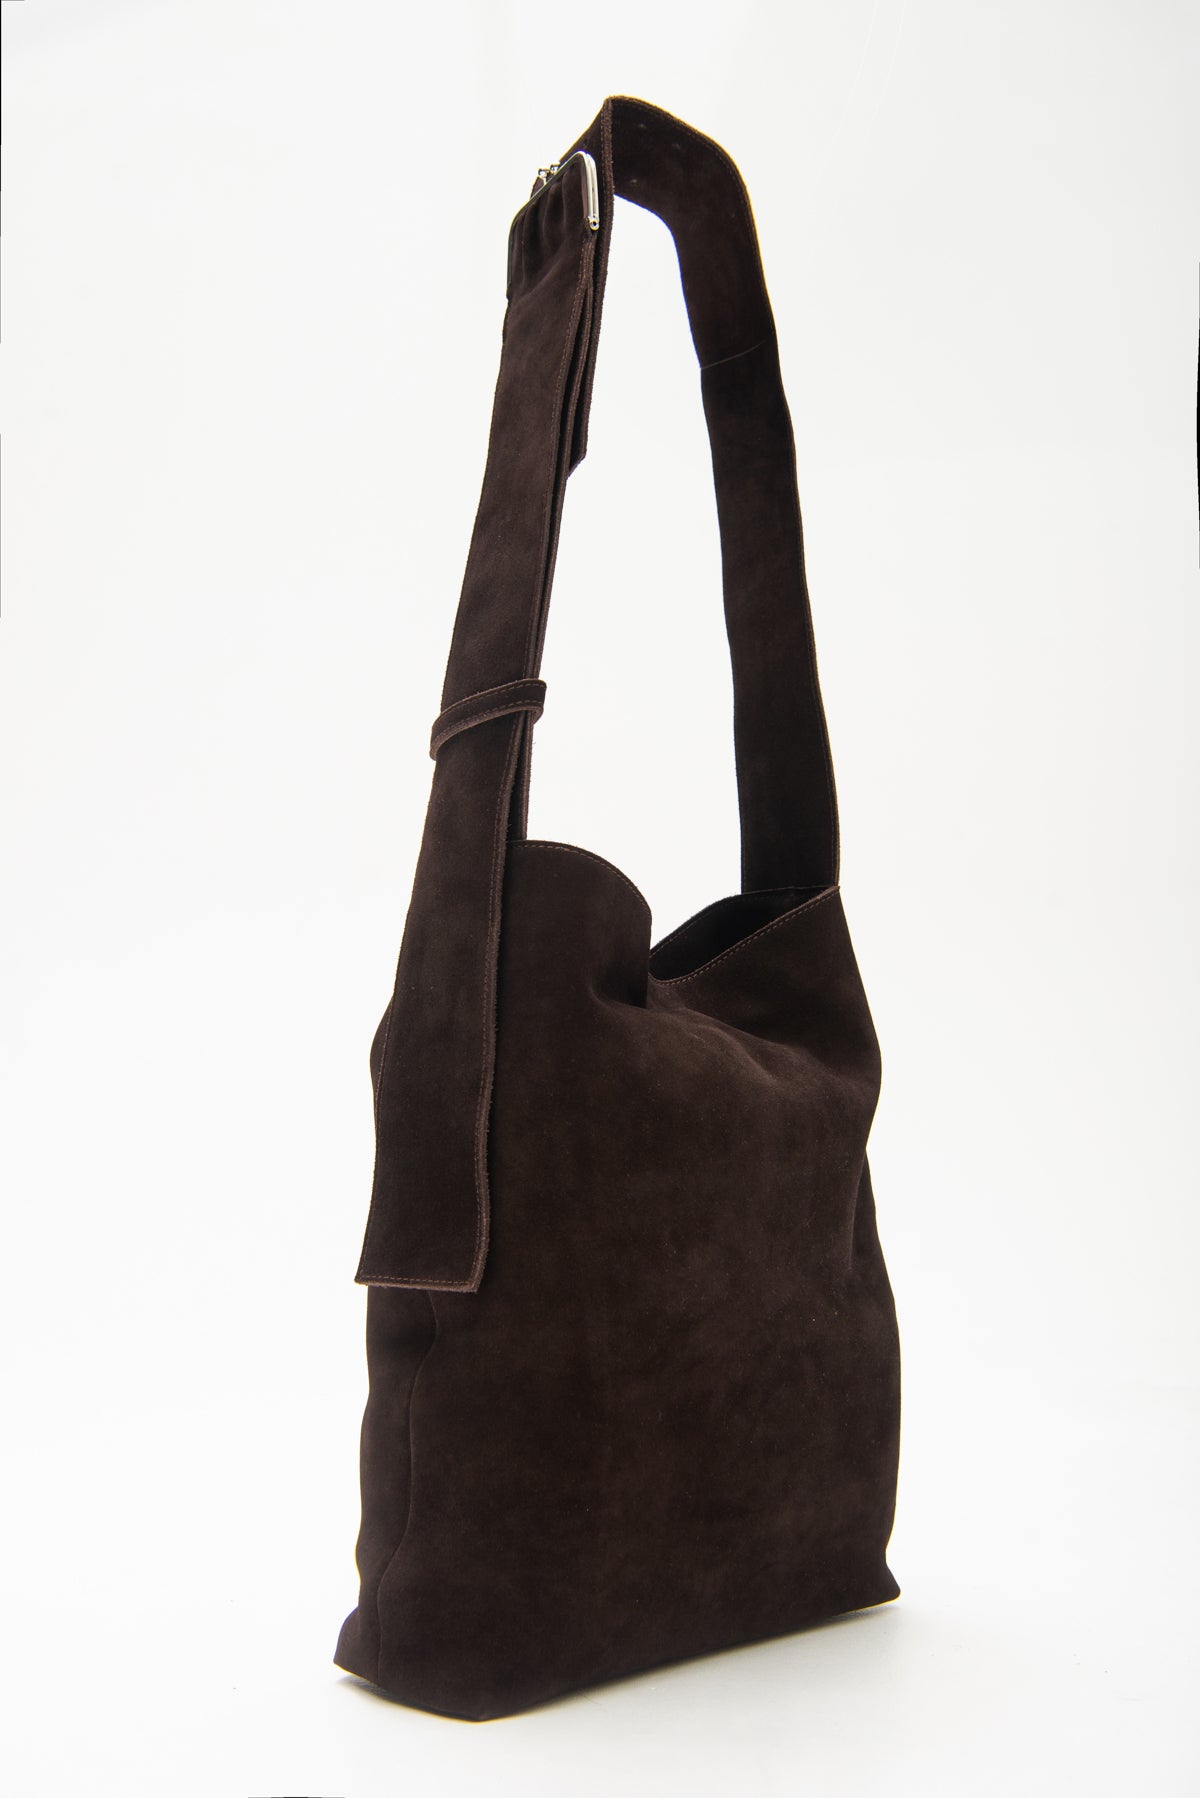 AVA SUEDE BAG IN CHOCOLATE BROWN